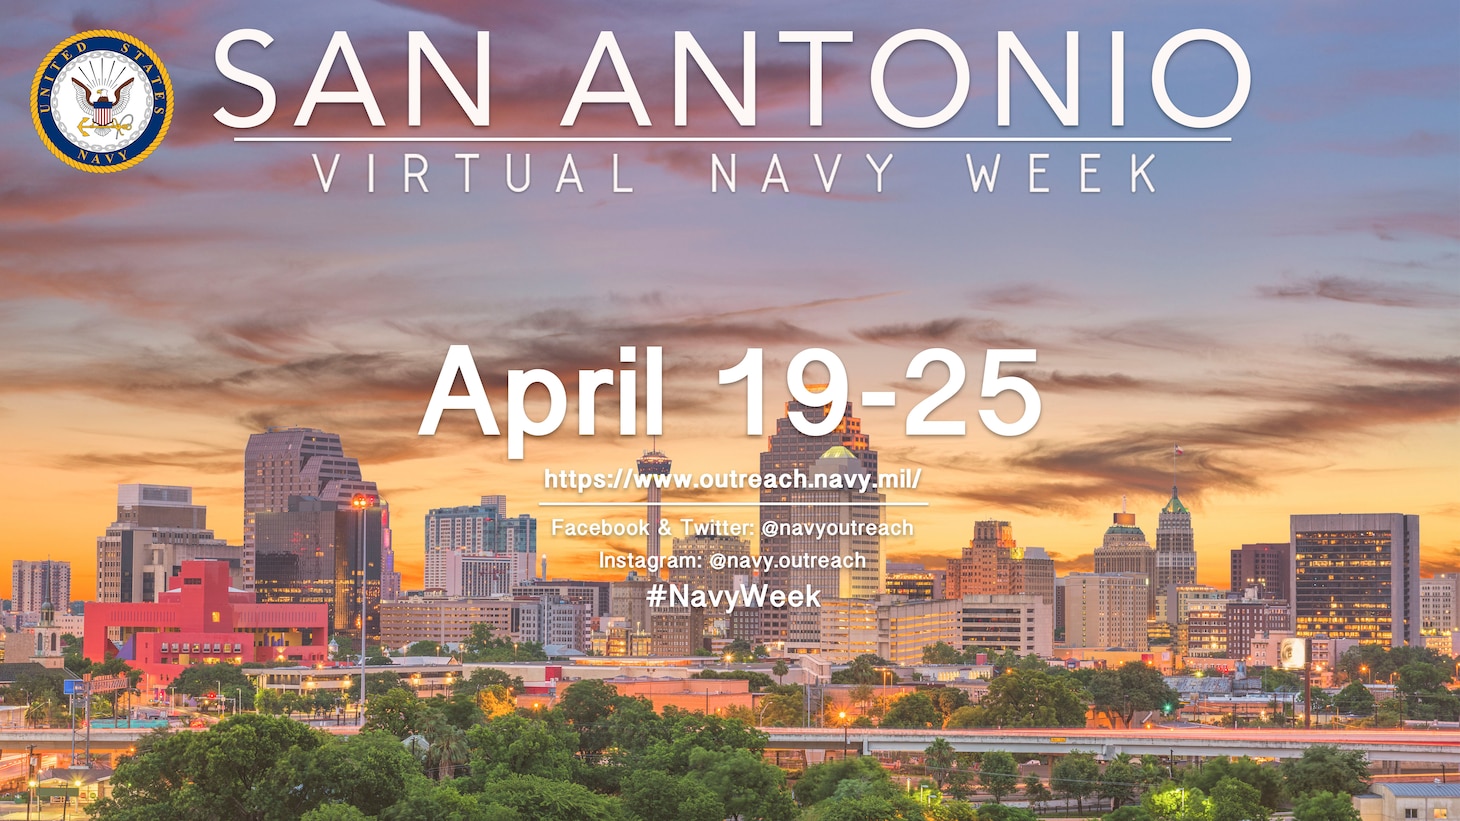 A promotional graphic created for the San Antonio Virtual Navy Week hosted by the Navy Office of Community Outreach.